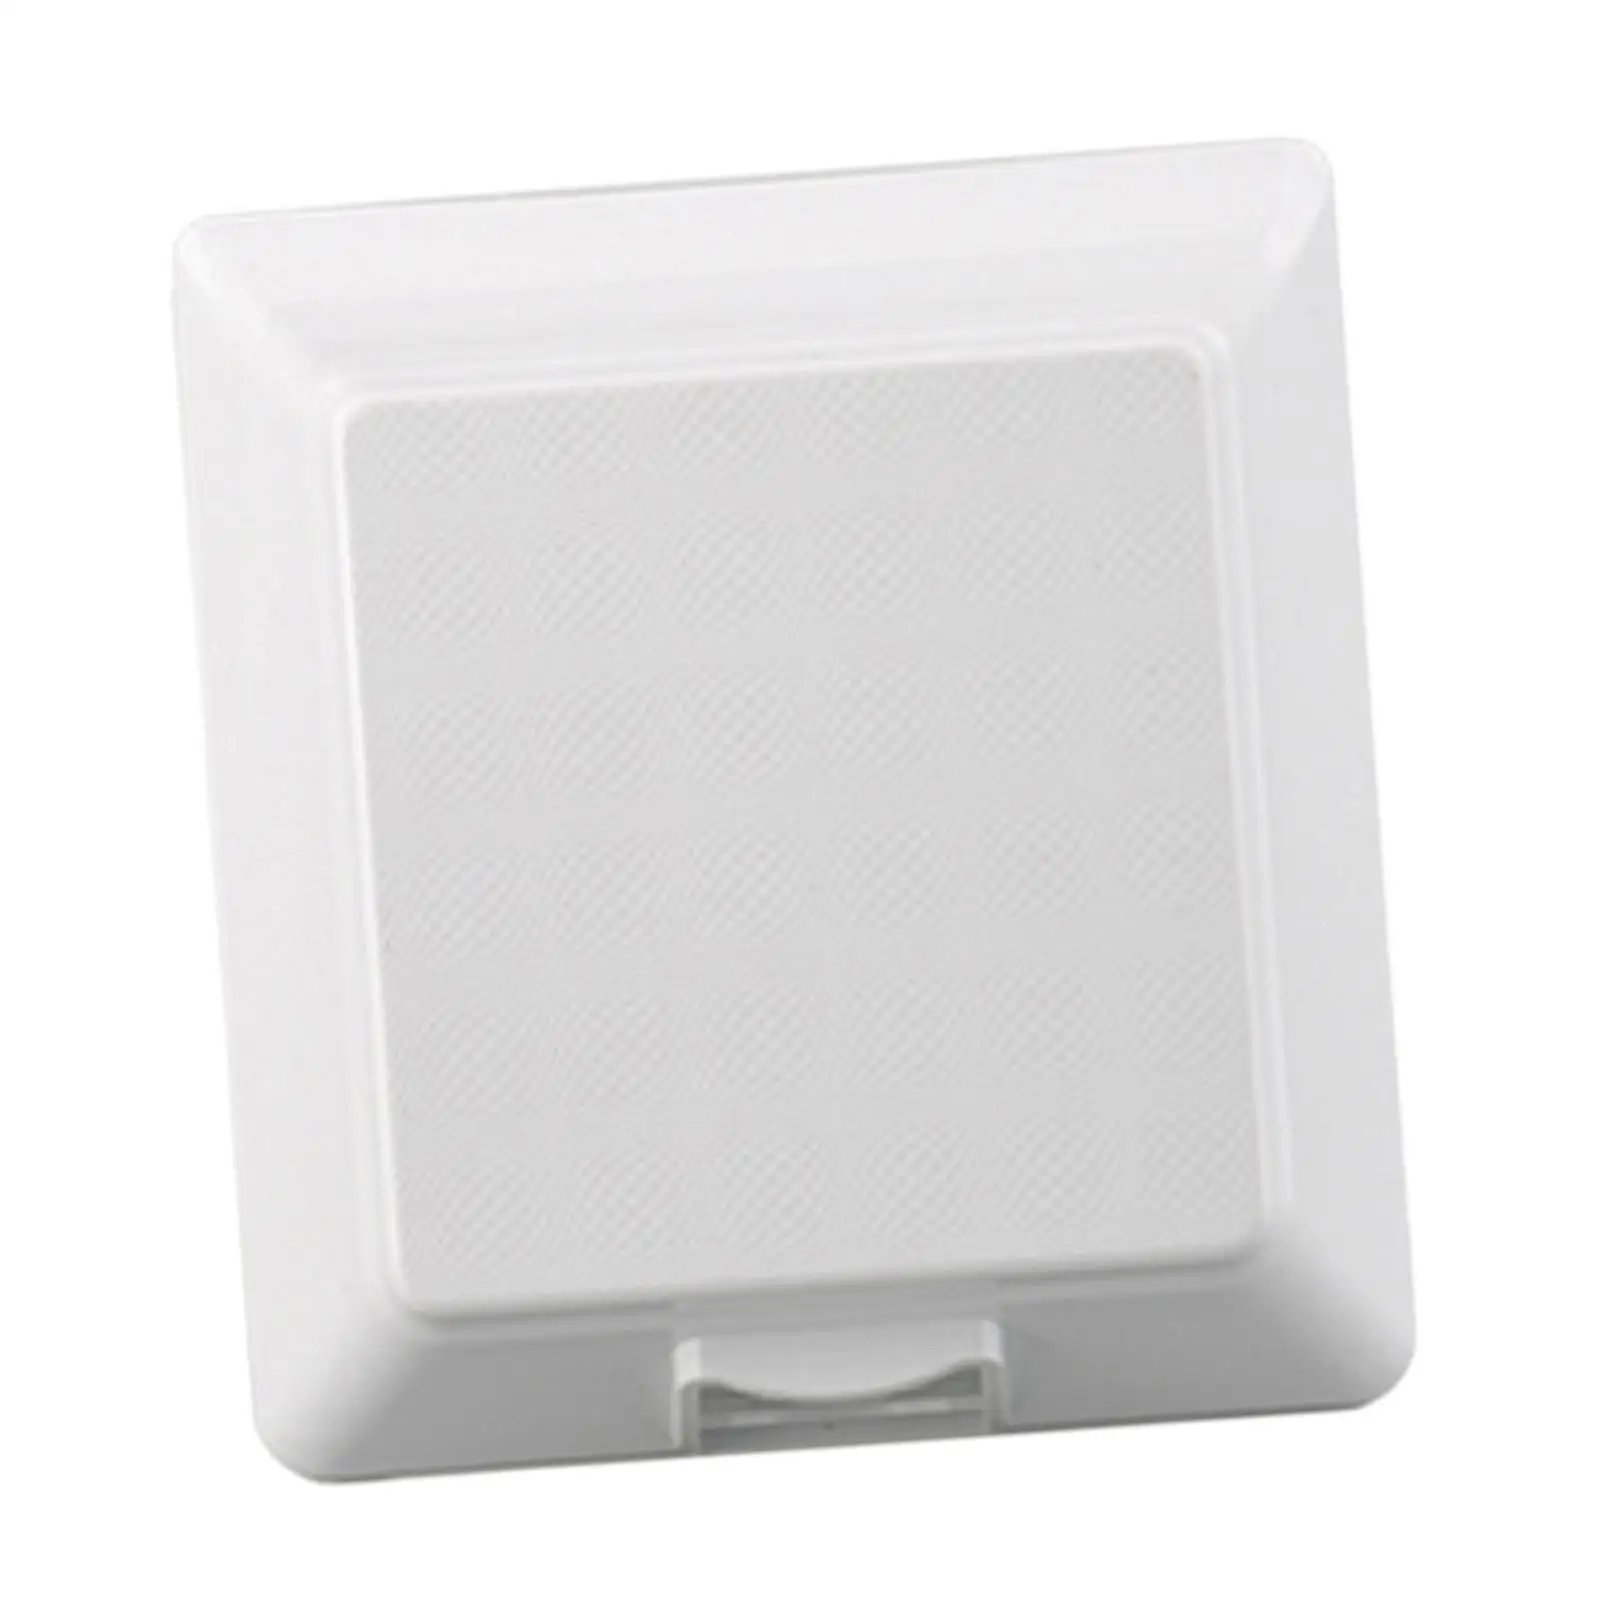 Switch Cover Waterproof Outlet Box Dustproof Switch Box Panel Outlet Cover for Outdoor Home Improvement Office Living Room